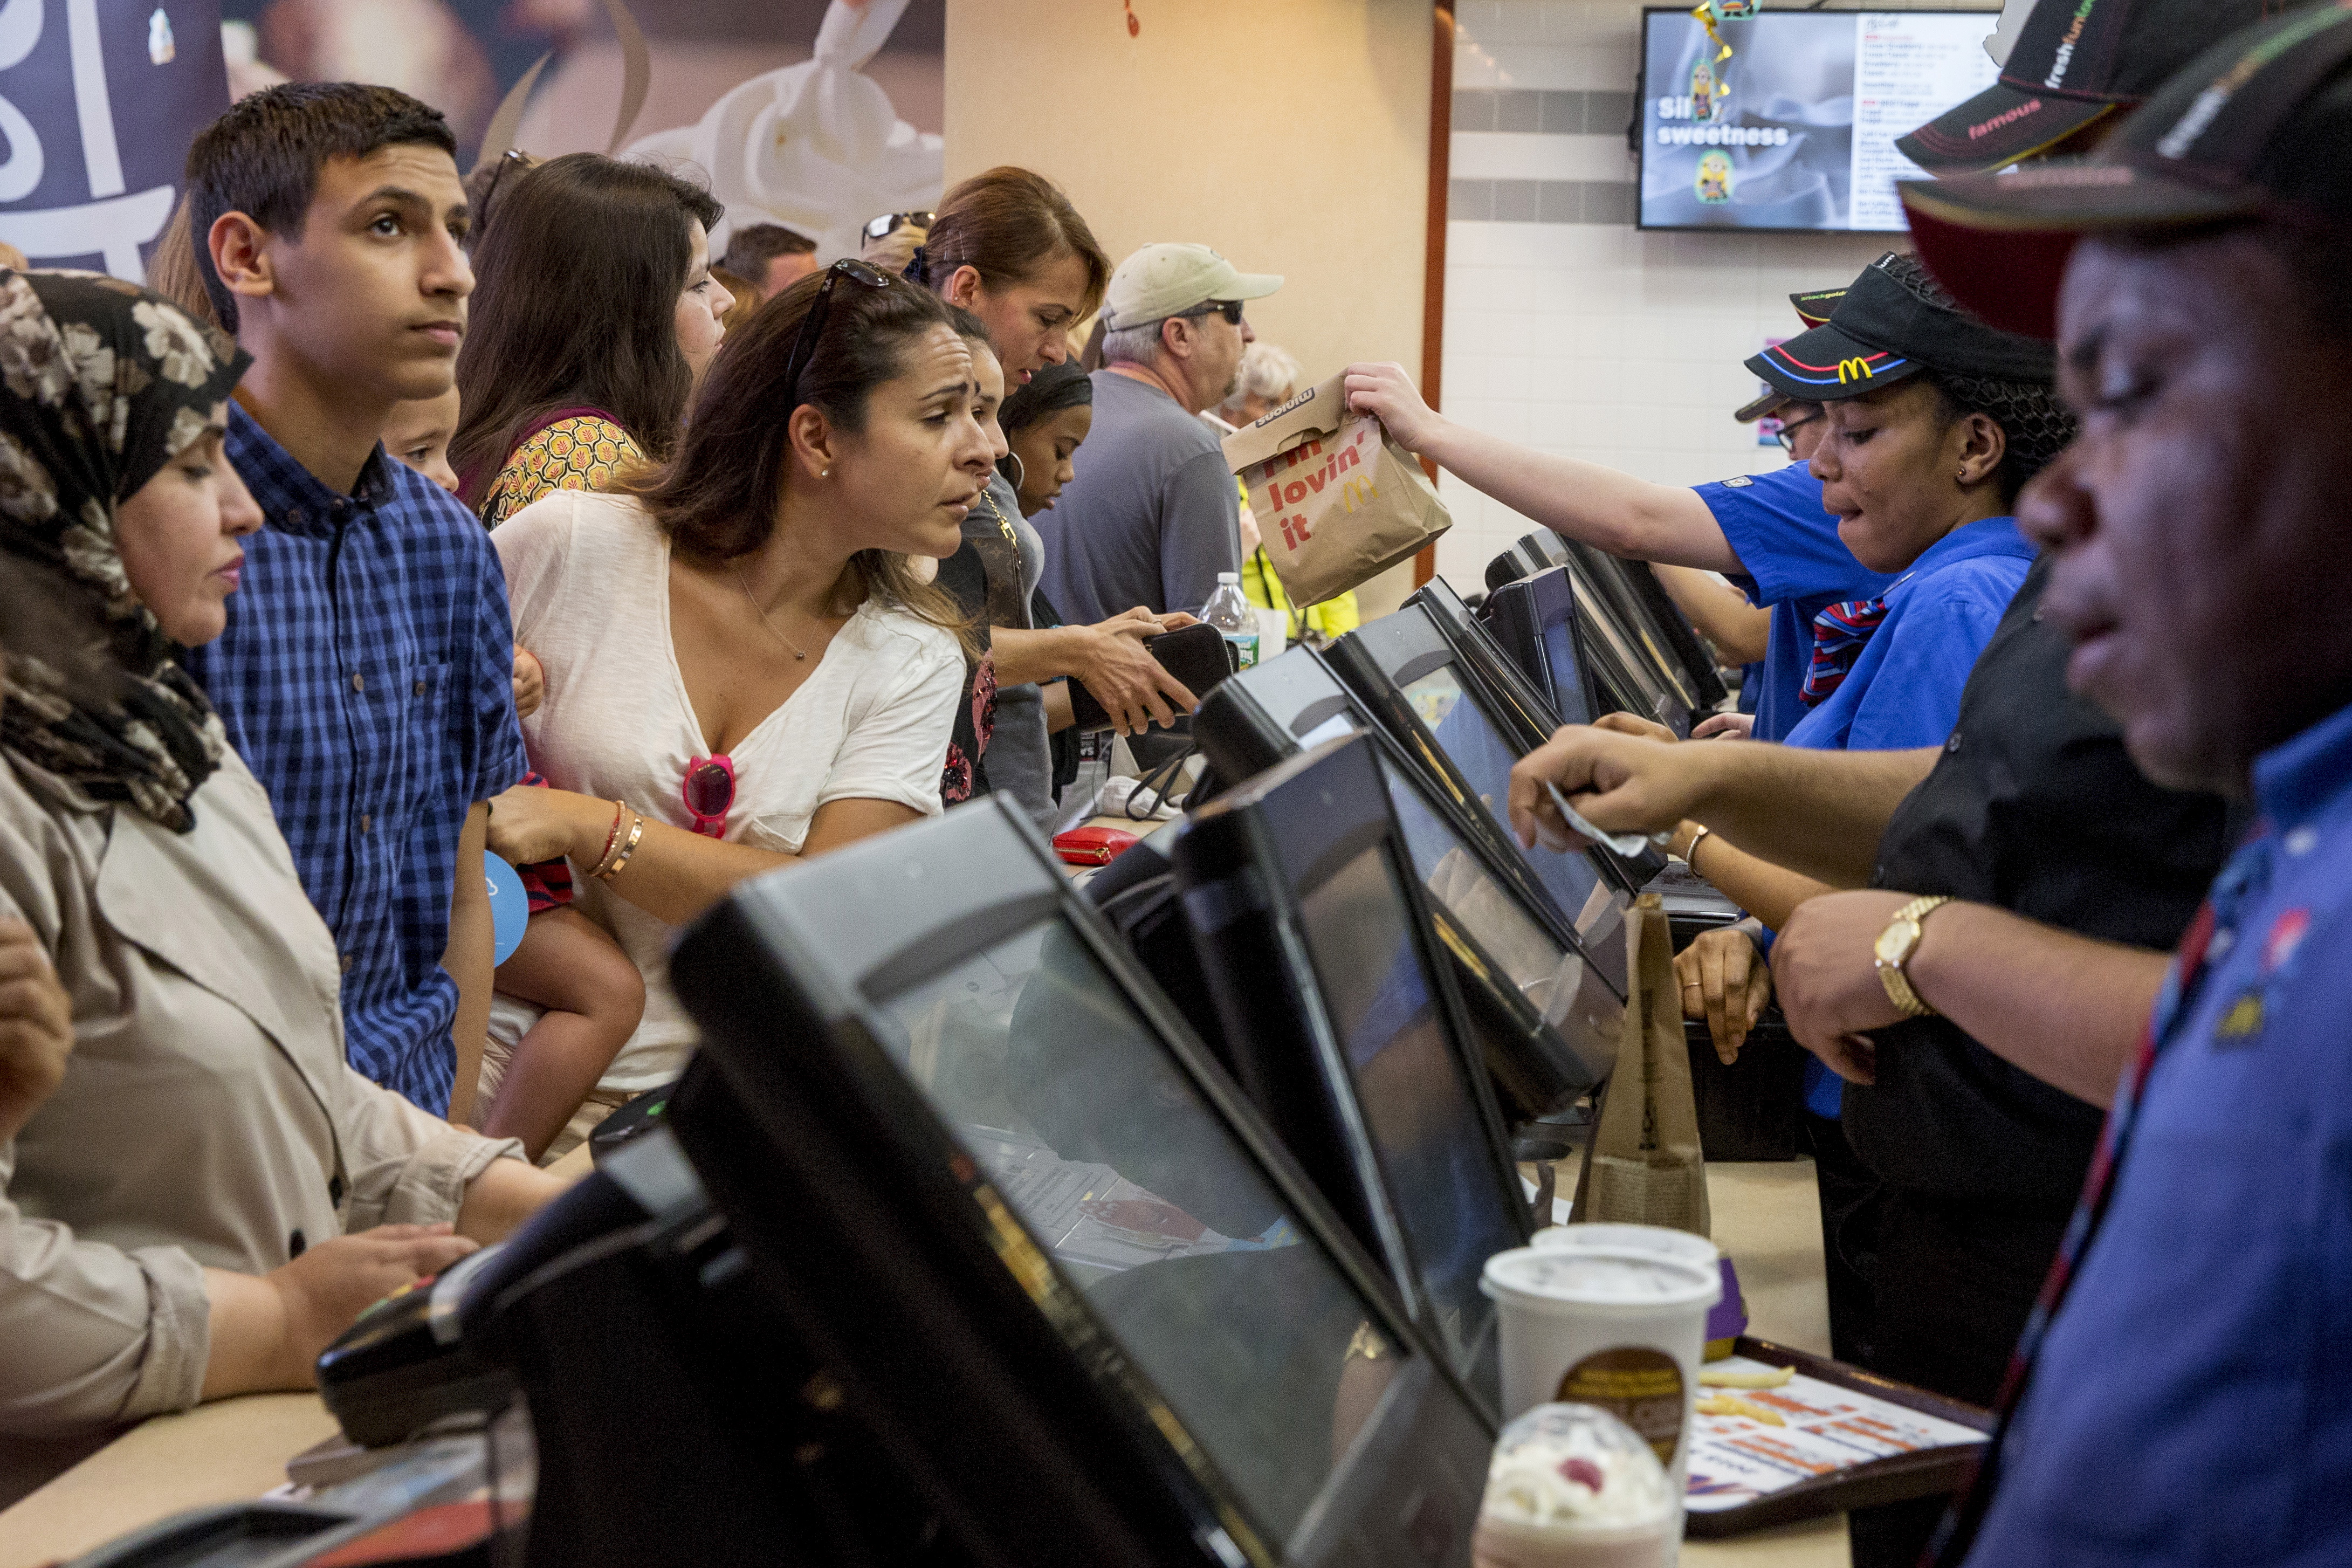 Customers are served at a McDonald's in Times Square in New York on July 23, 2015.